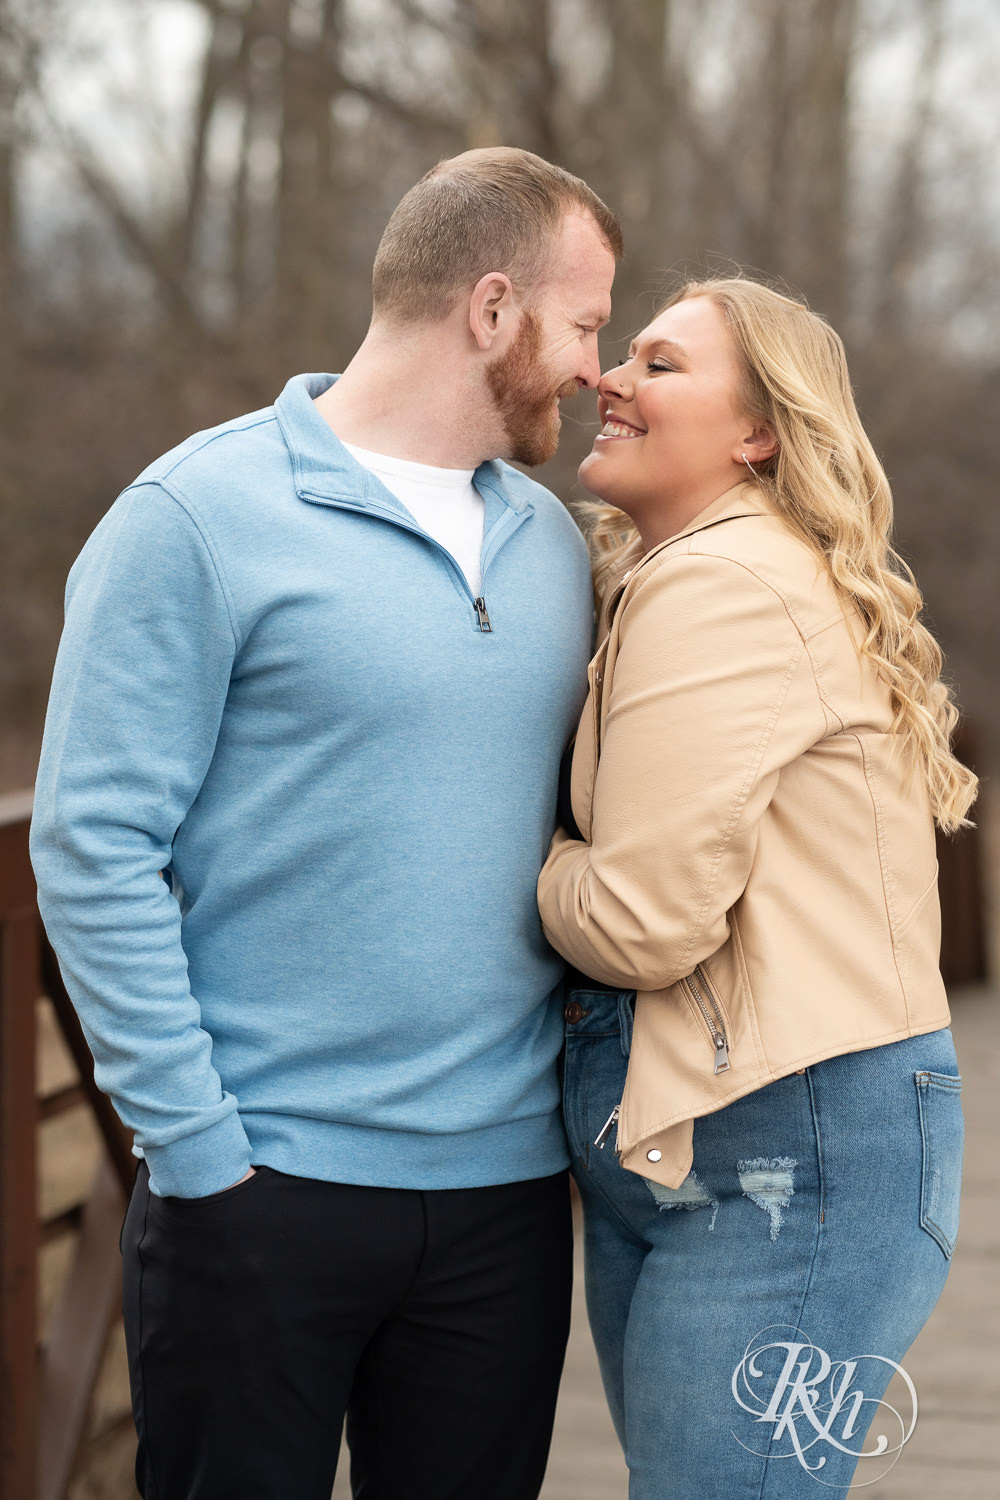 Man in blue shirt and woman in jeans smile during engagement photography at Rice Creek North Regional Trail in Shoreview, Minnesota.